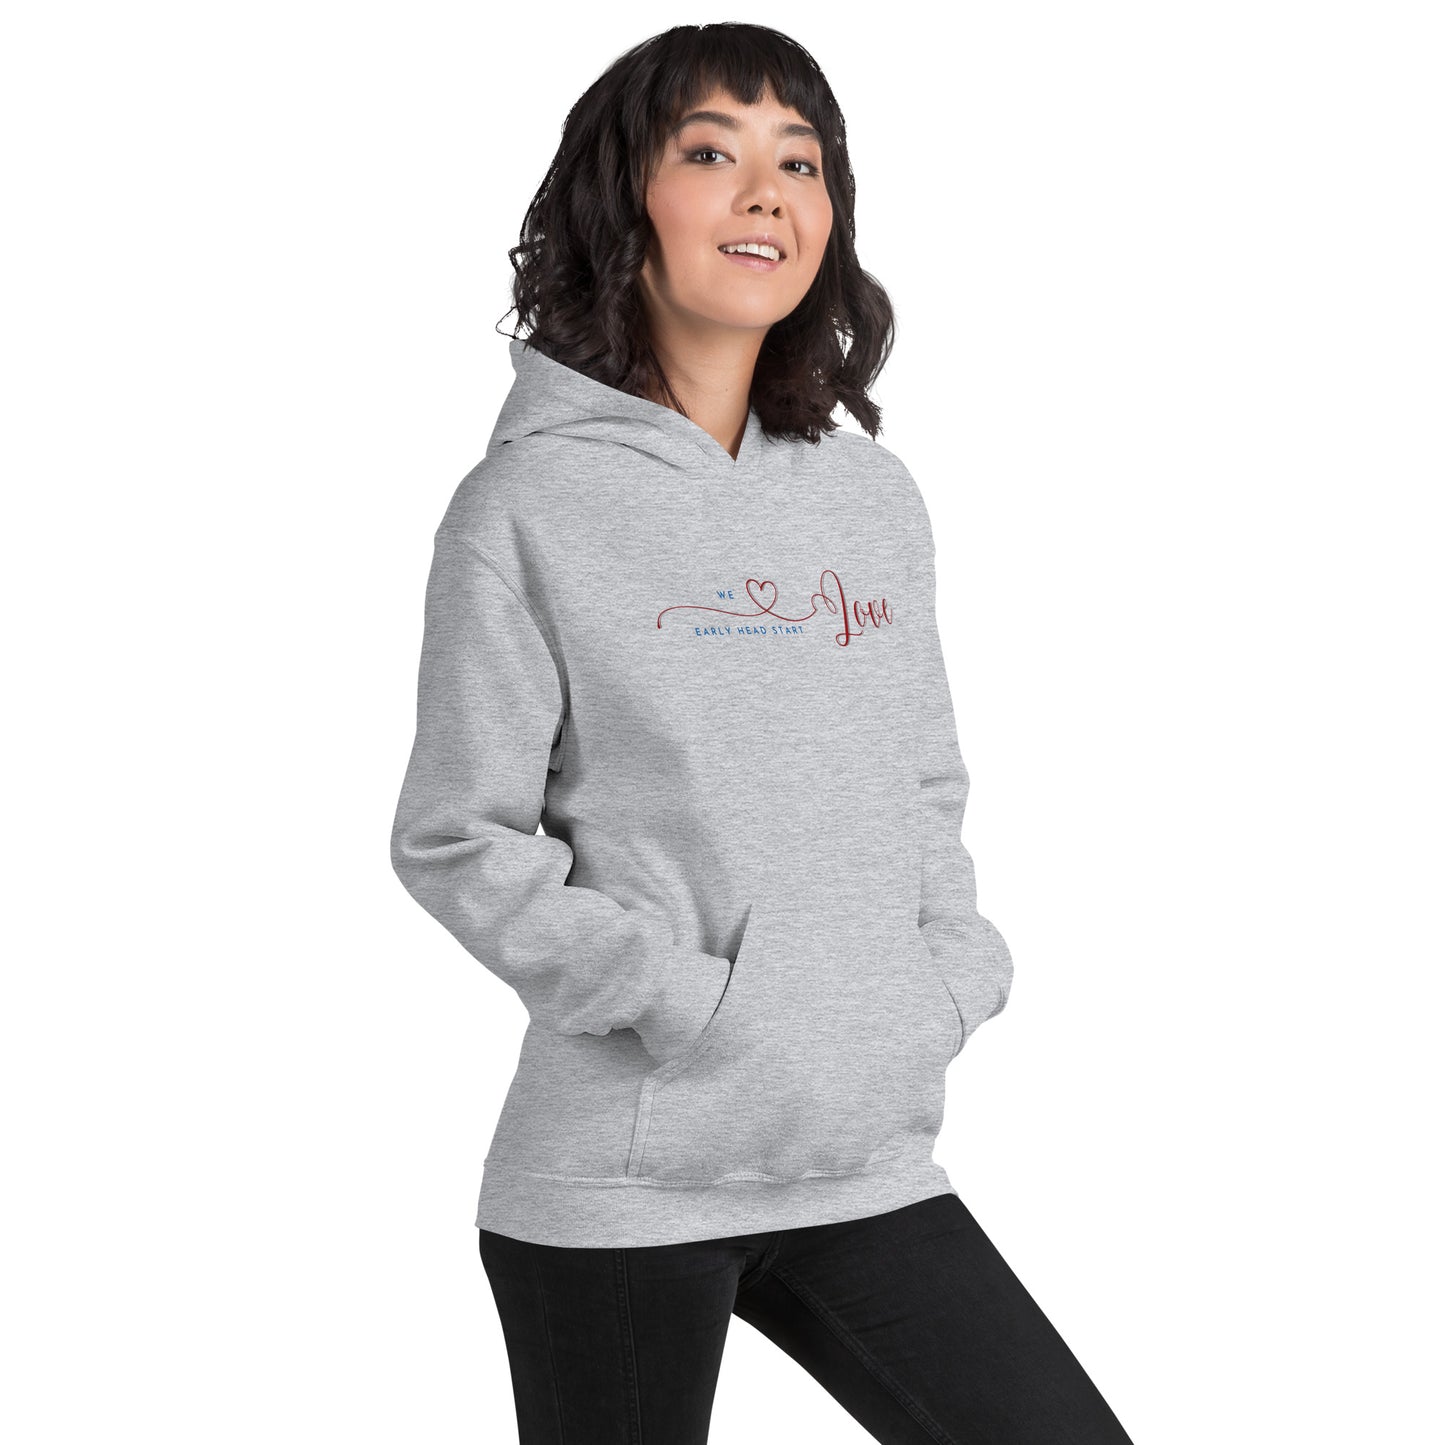 We Love Early Head Start - Unisex Hoodie ( Now in more colors and sizes)